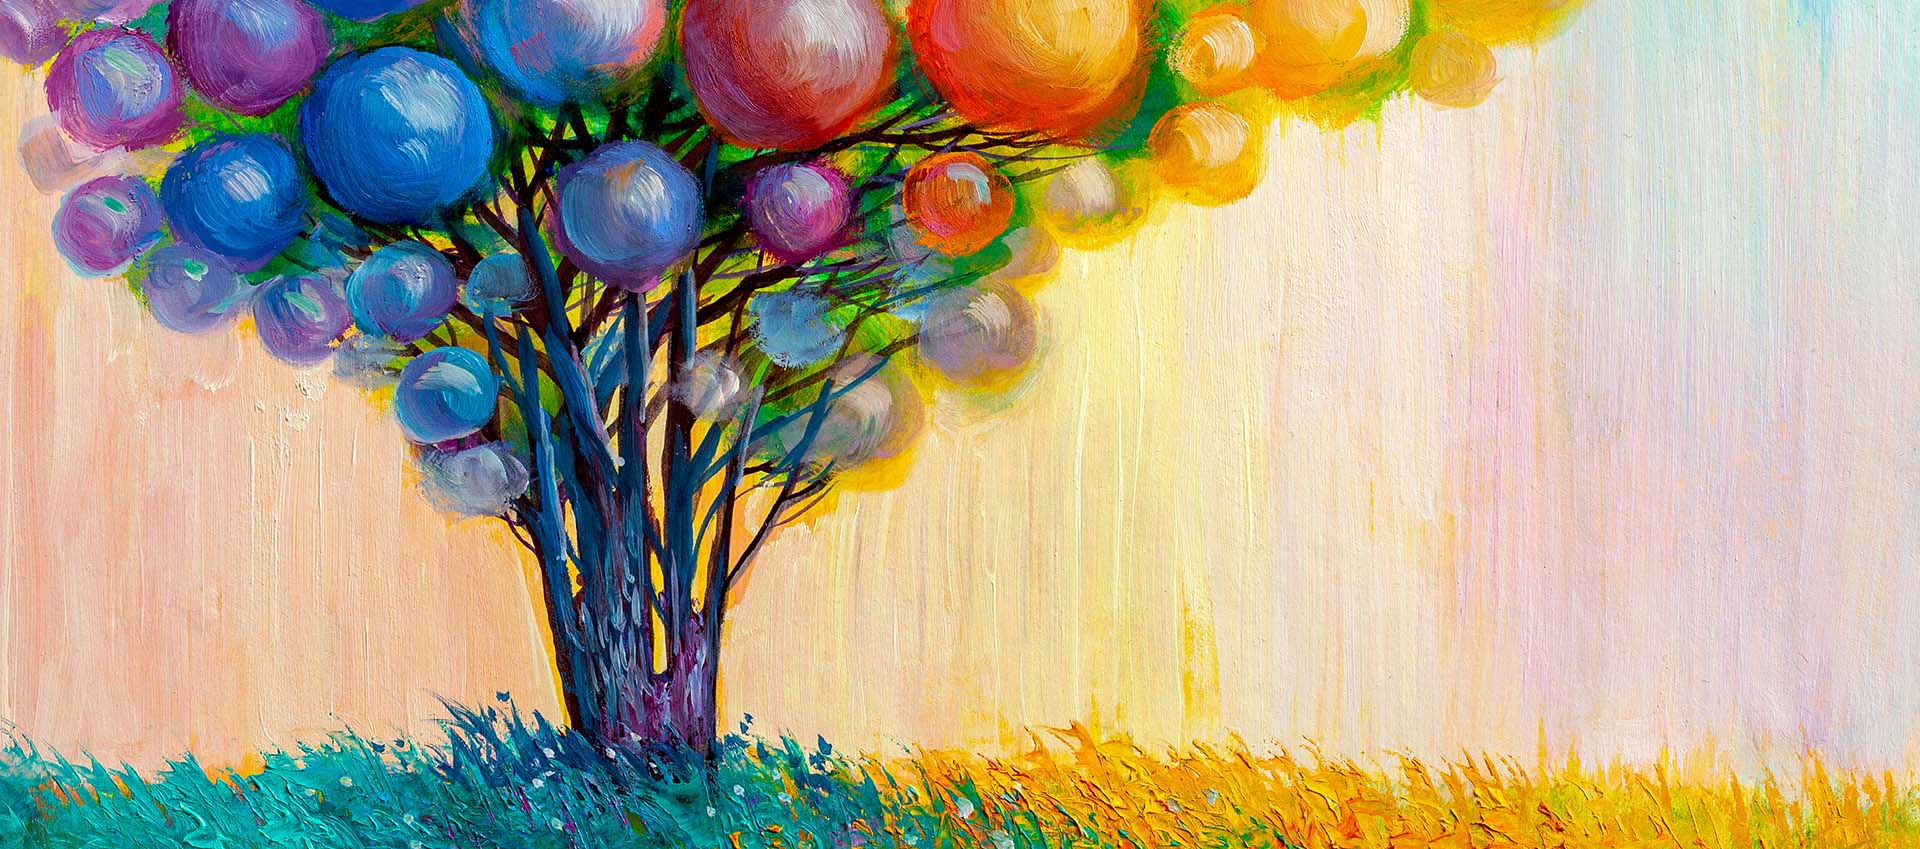 Abstract colorful tree. Ready to begin online therapy in Florida or online coaching in Texas? Get in touch today and beginning working with our online therapists.